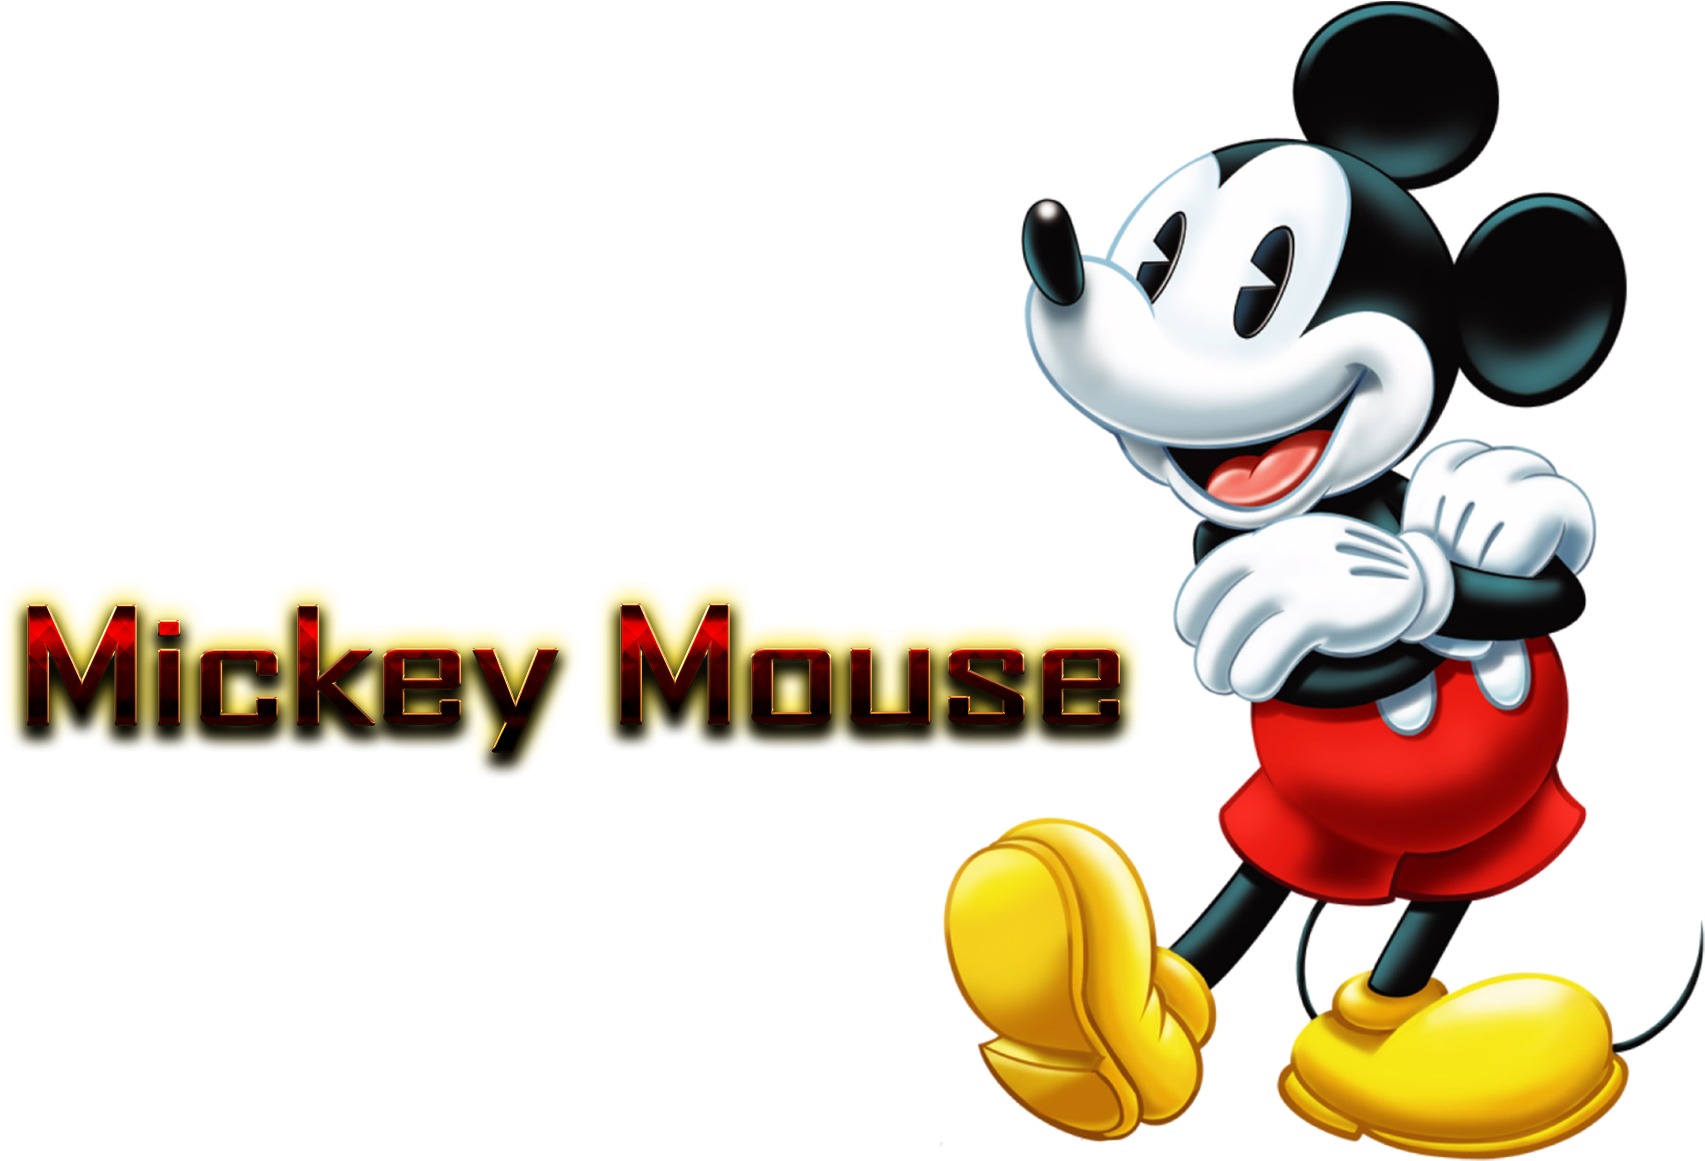 Download Mickey Mouse Png Download - Mickey Mouse PNG Image with No  Background - PNGkey.com